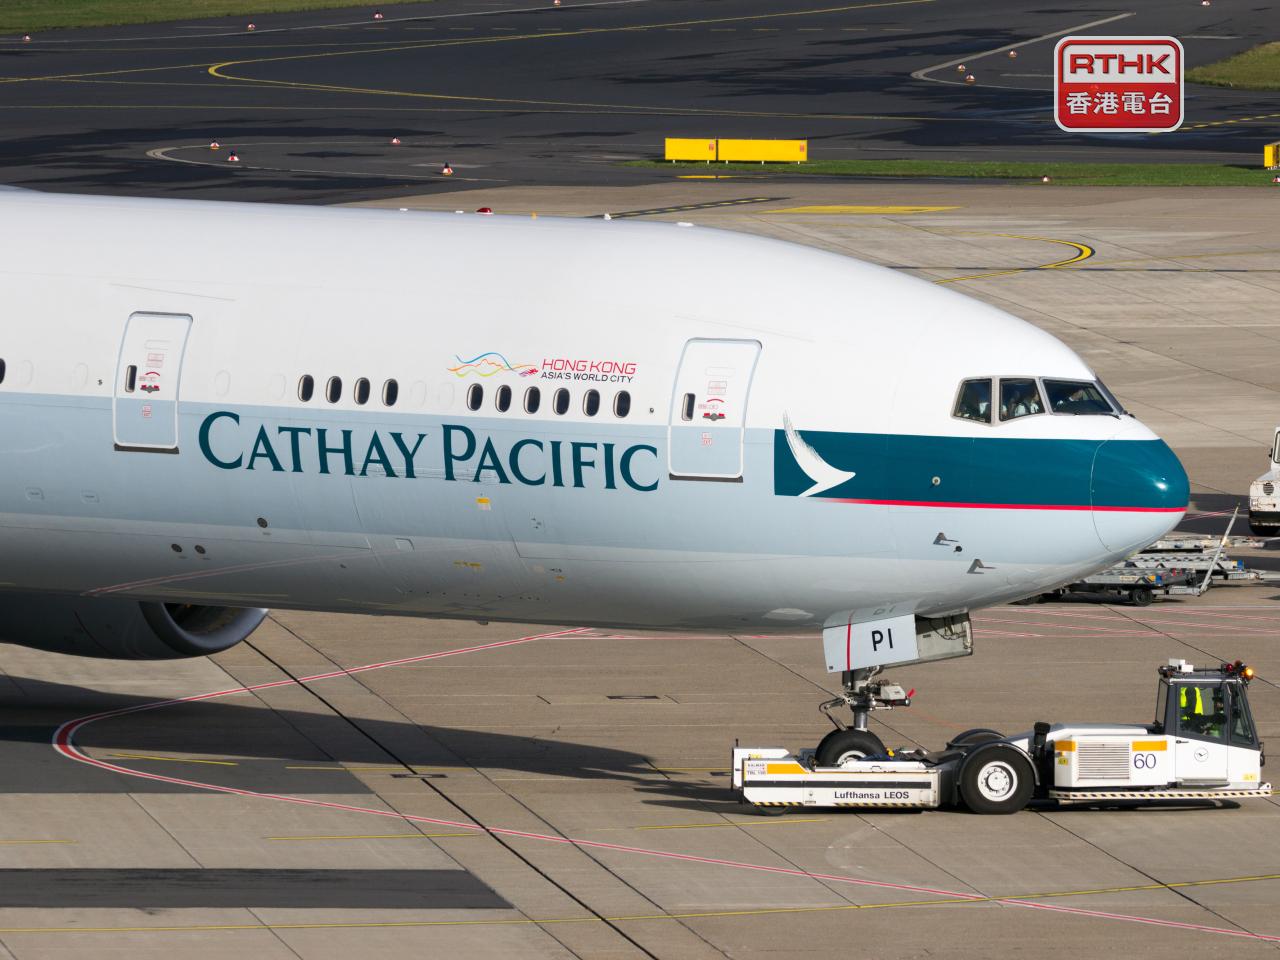 Cathay delays pre-pandemic capacity target to 2025